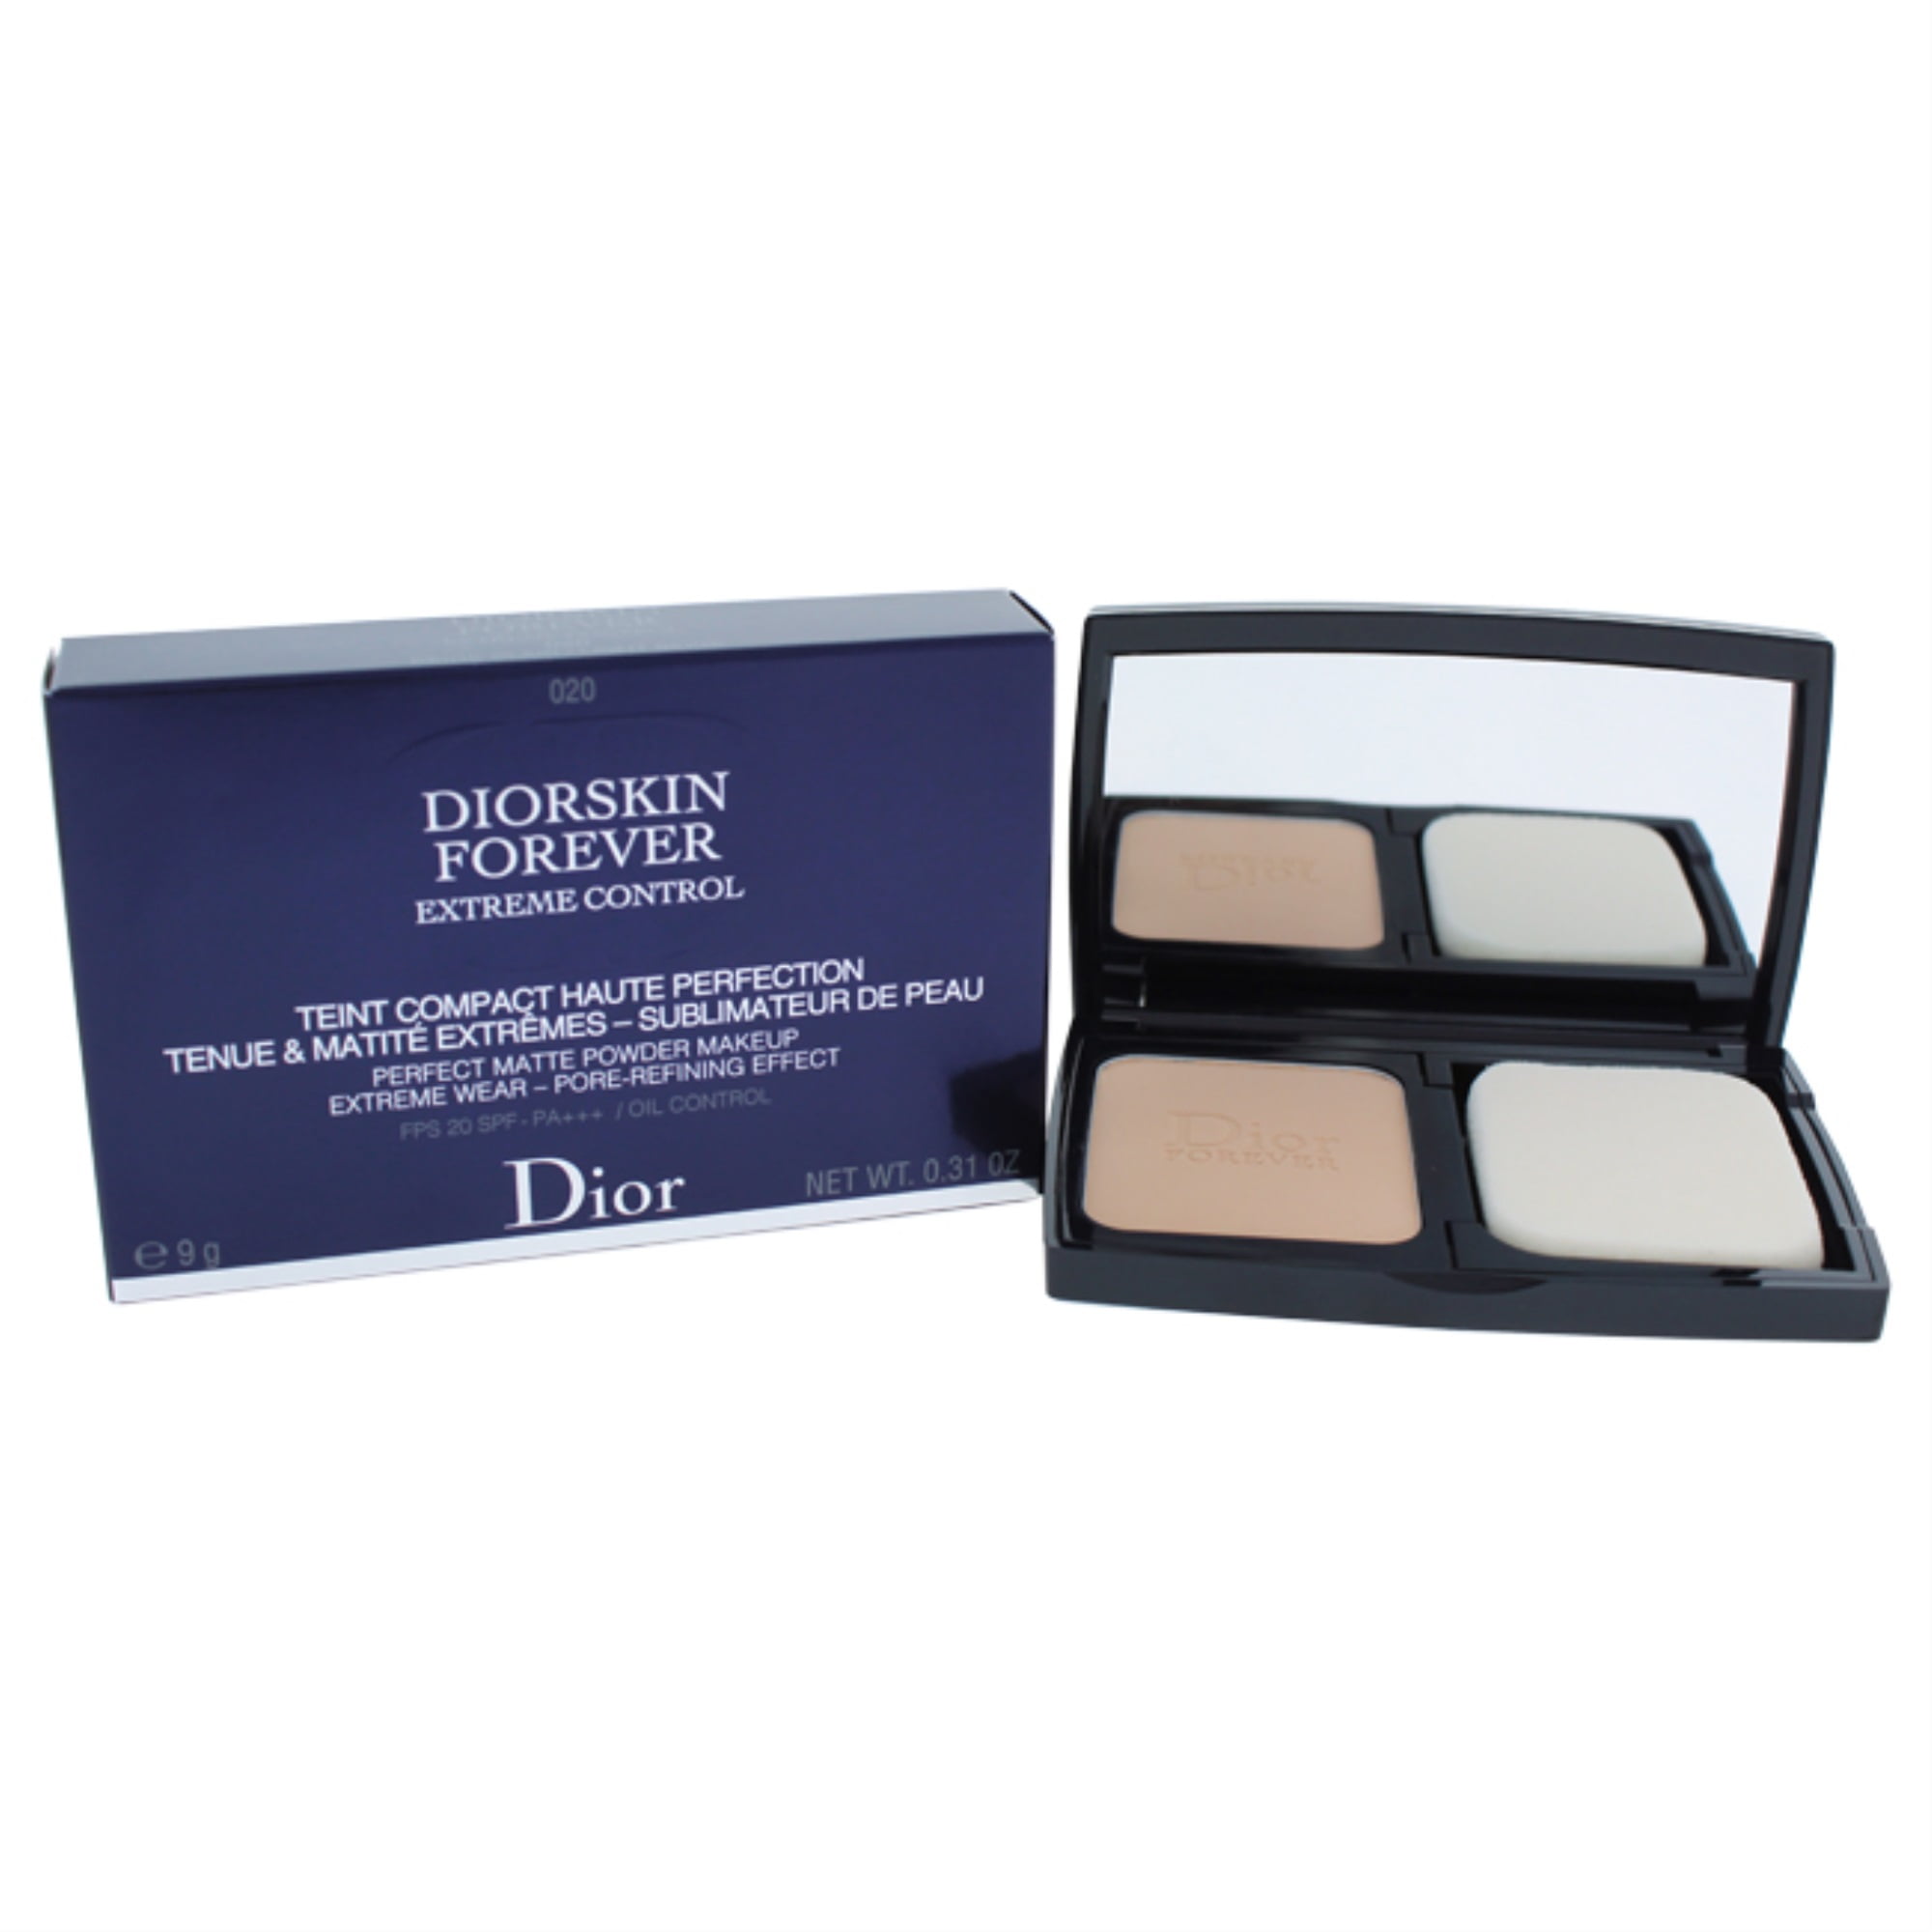 Diorskin Forever Extreme Control Matte Powder Makeup SPF 20 - # 020 Light  Beige by Christian Dior for Women - 0.31 oz Foundation